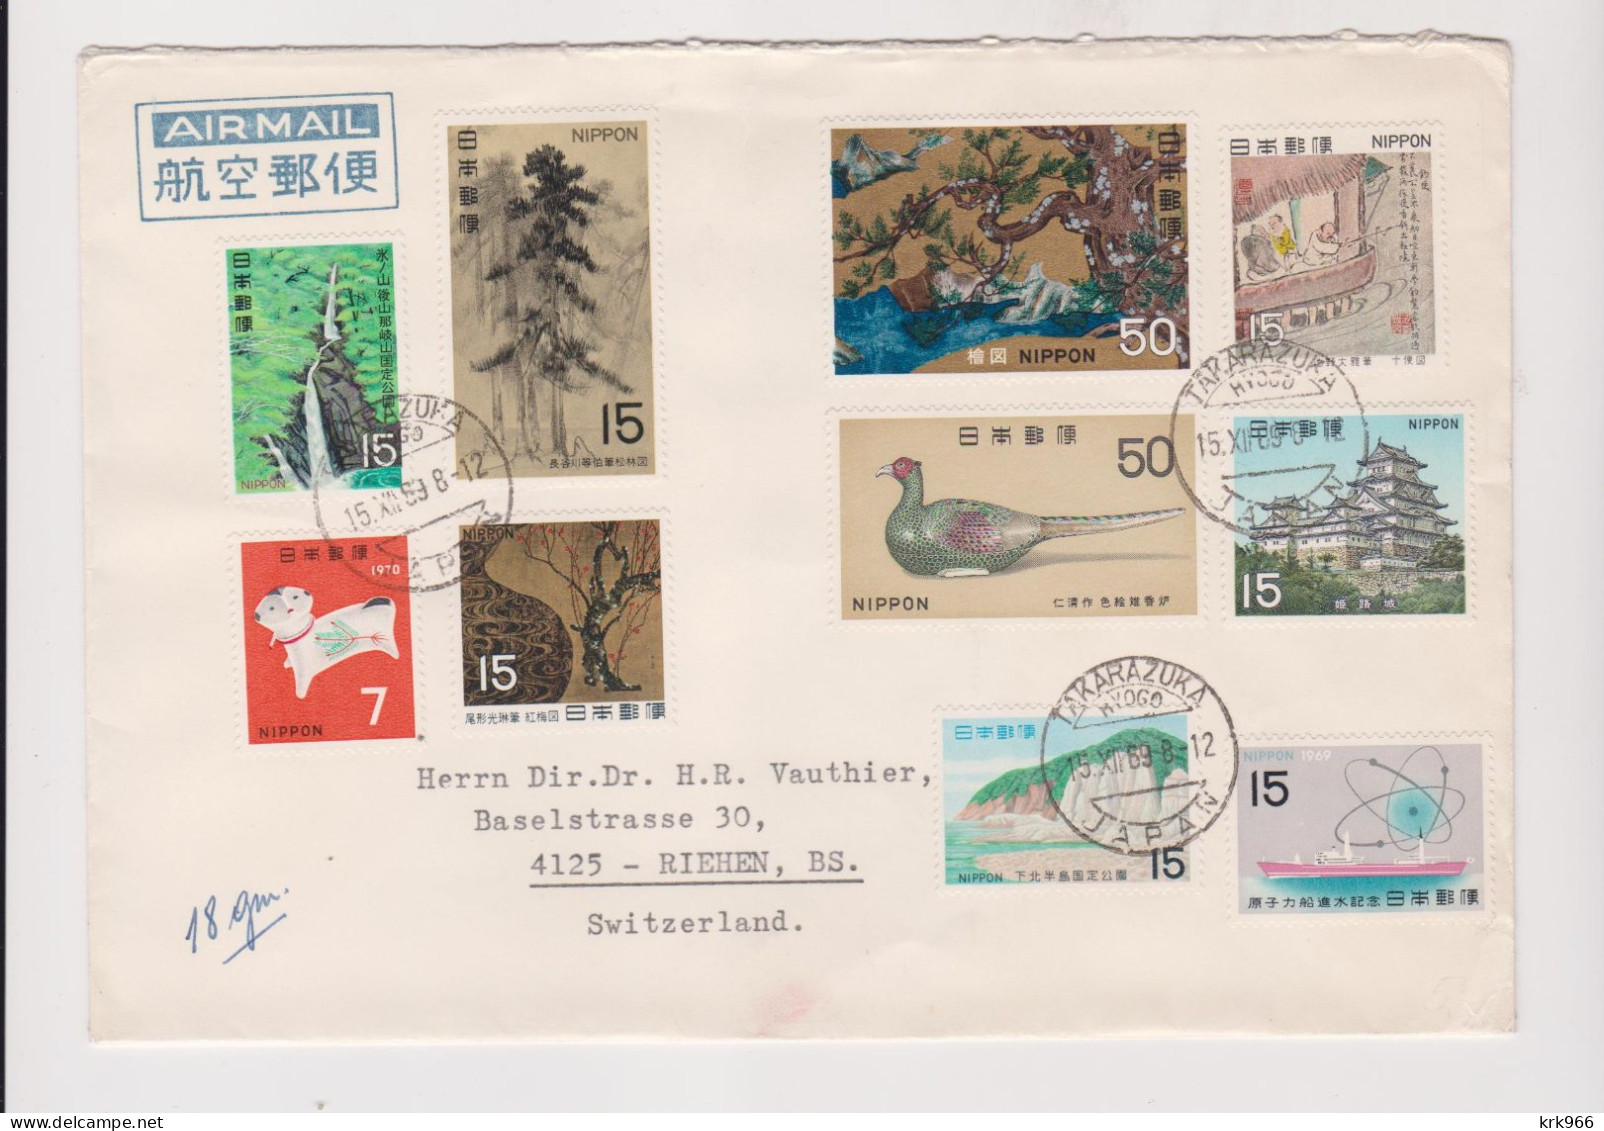 JAPAN 1969 TAKARAZUKA Nice Airmail Cover To Swityerland - Lettres & Documents